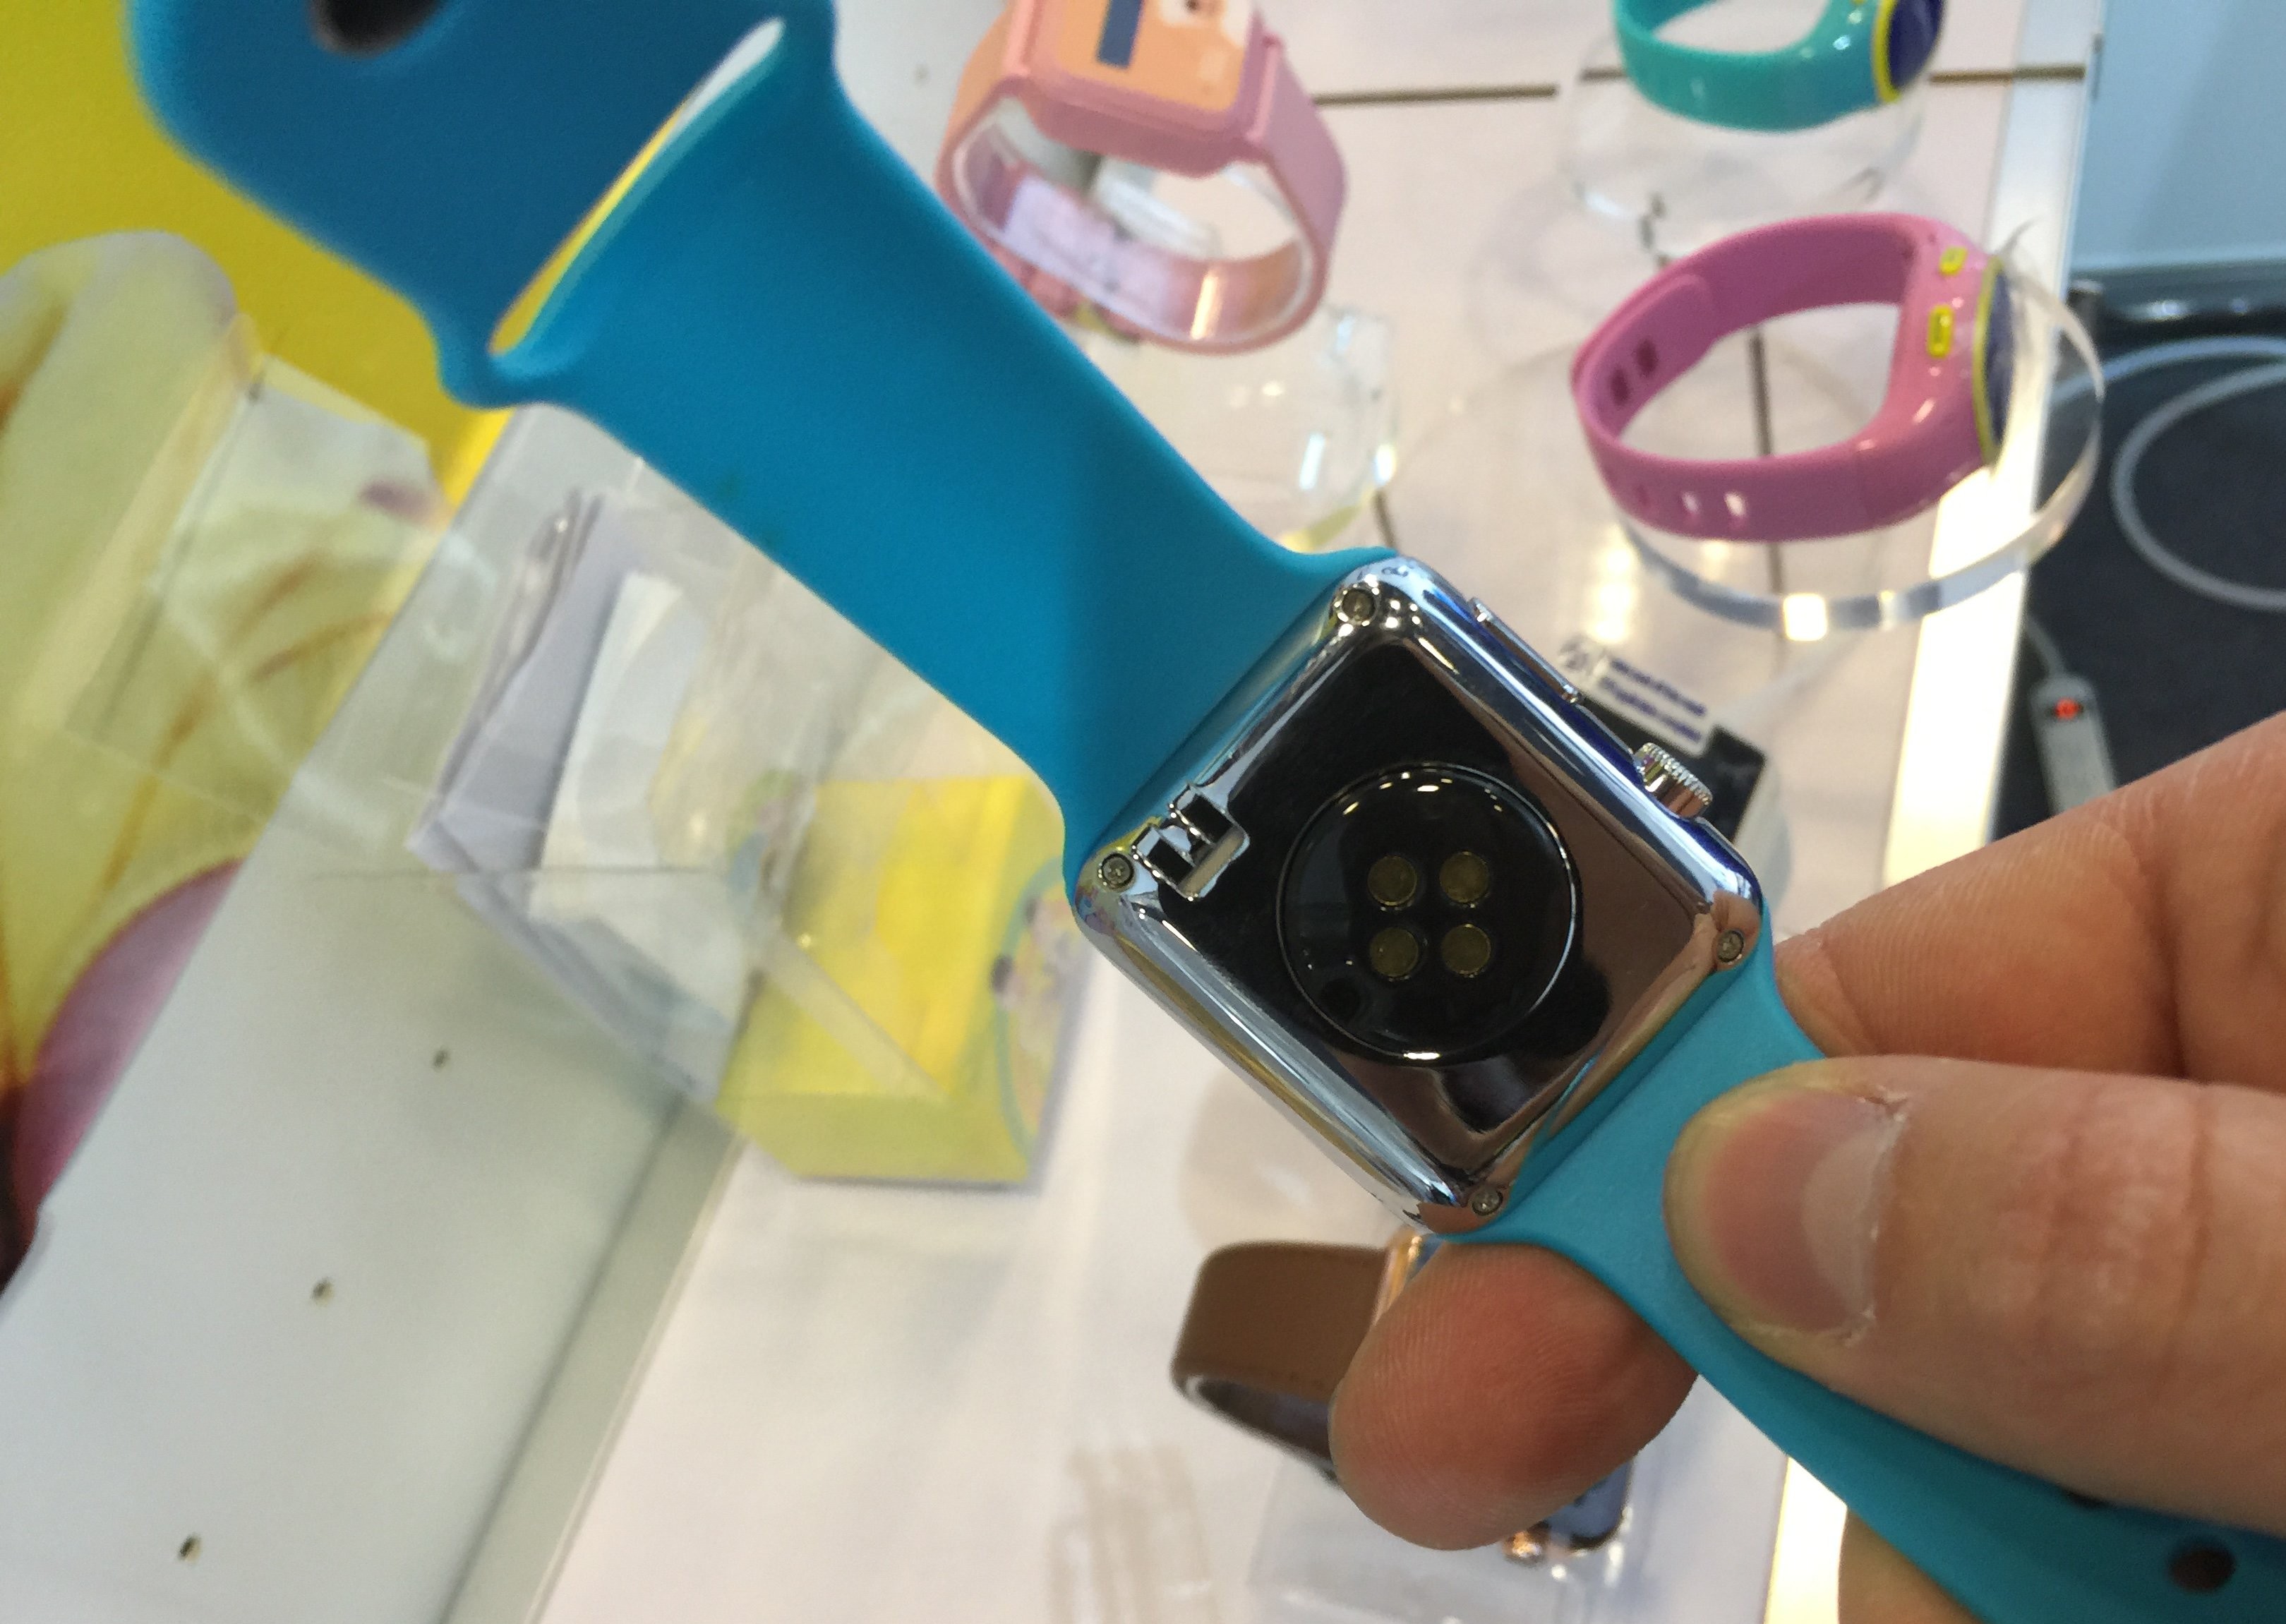 buy-the-apple-watch-for-ridiculously-cheap-price